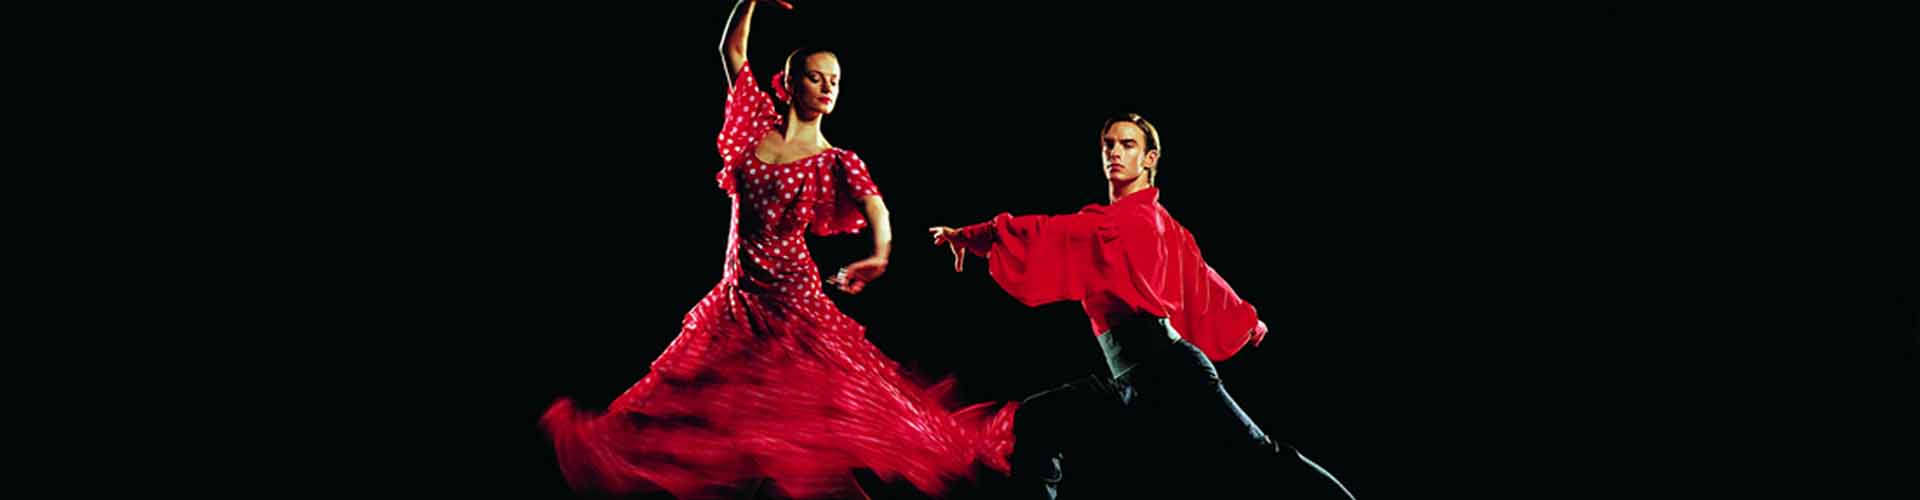 Learn the Flamenco Dance, or see it live on stage